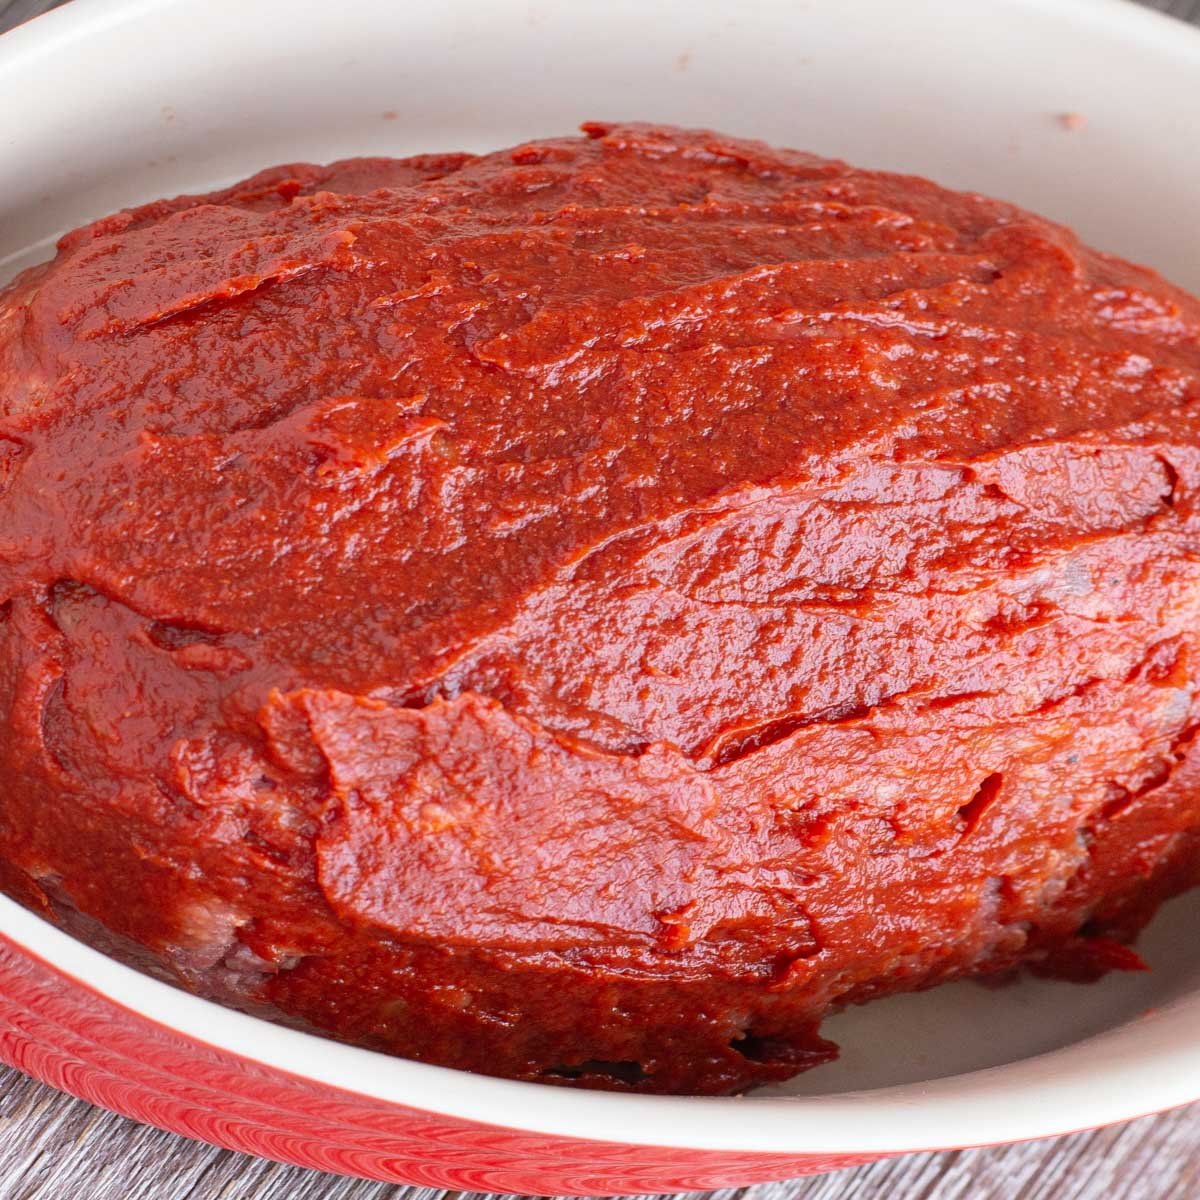 Unbaked meatloaf covered in tomato paste in oval baking dish.